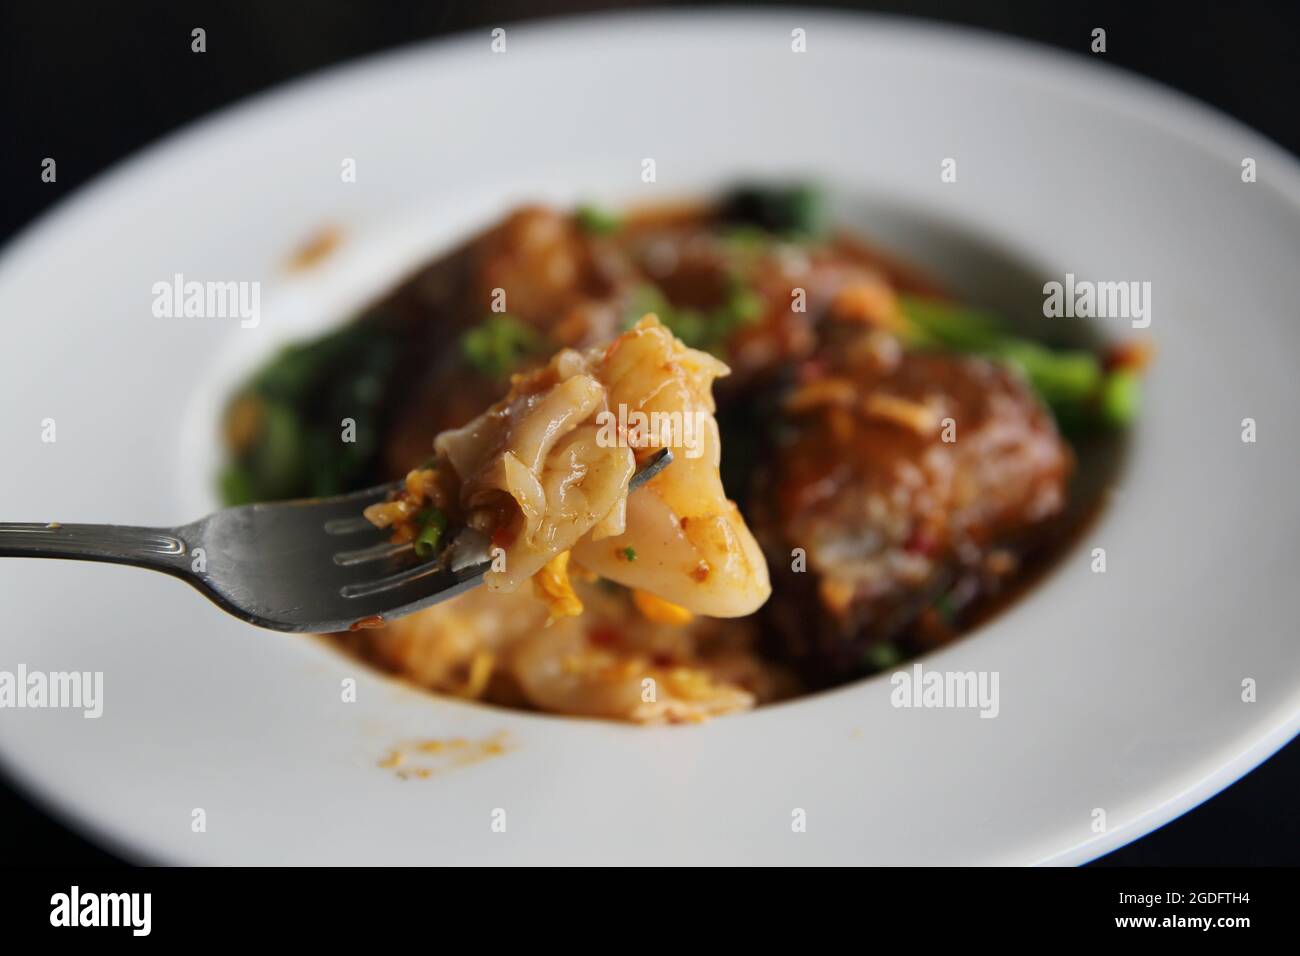 stir fried instant noodle with Pork ribs Stock Photo